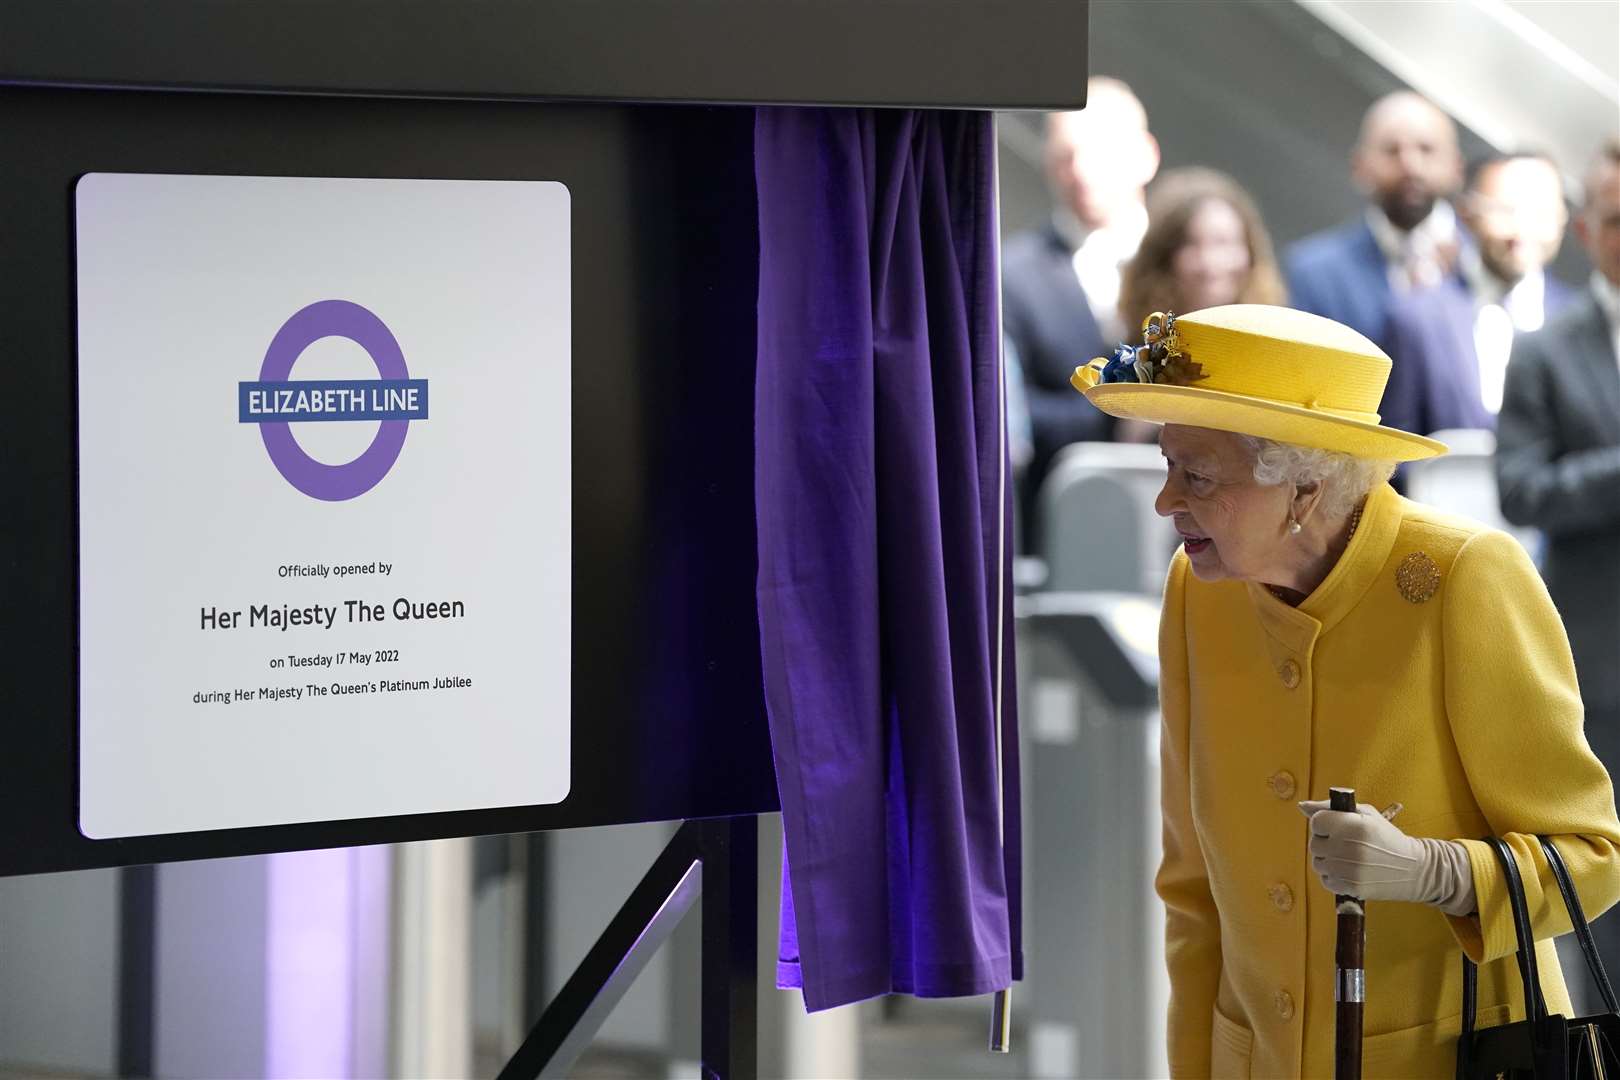 The Queen unveils a plaque to mark the Elizabeth line’s official opening at Paddington station (Andrew Matthews/PA)